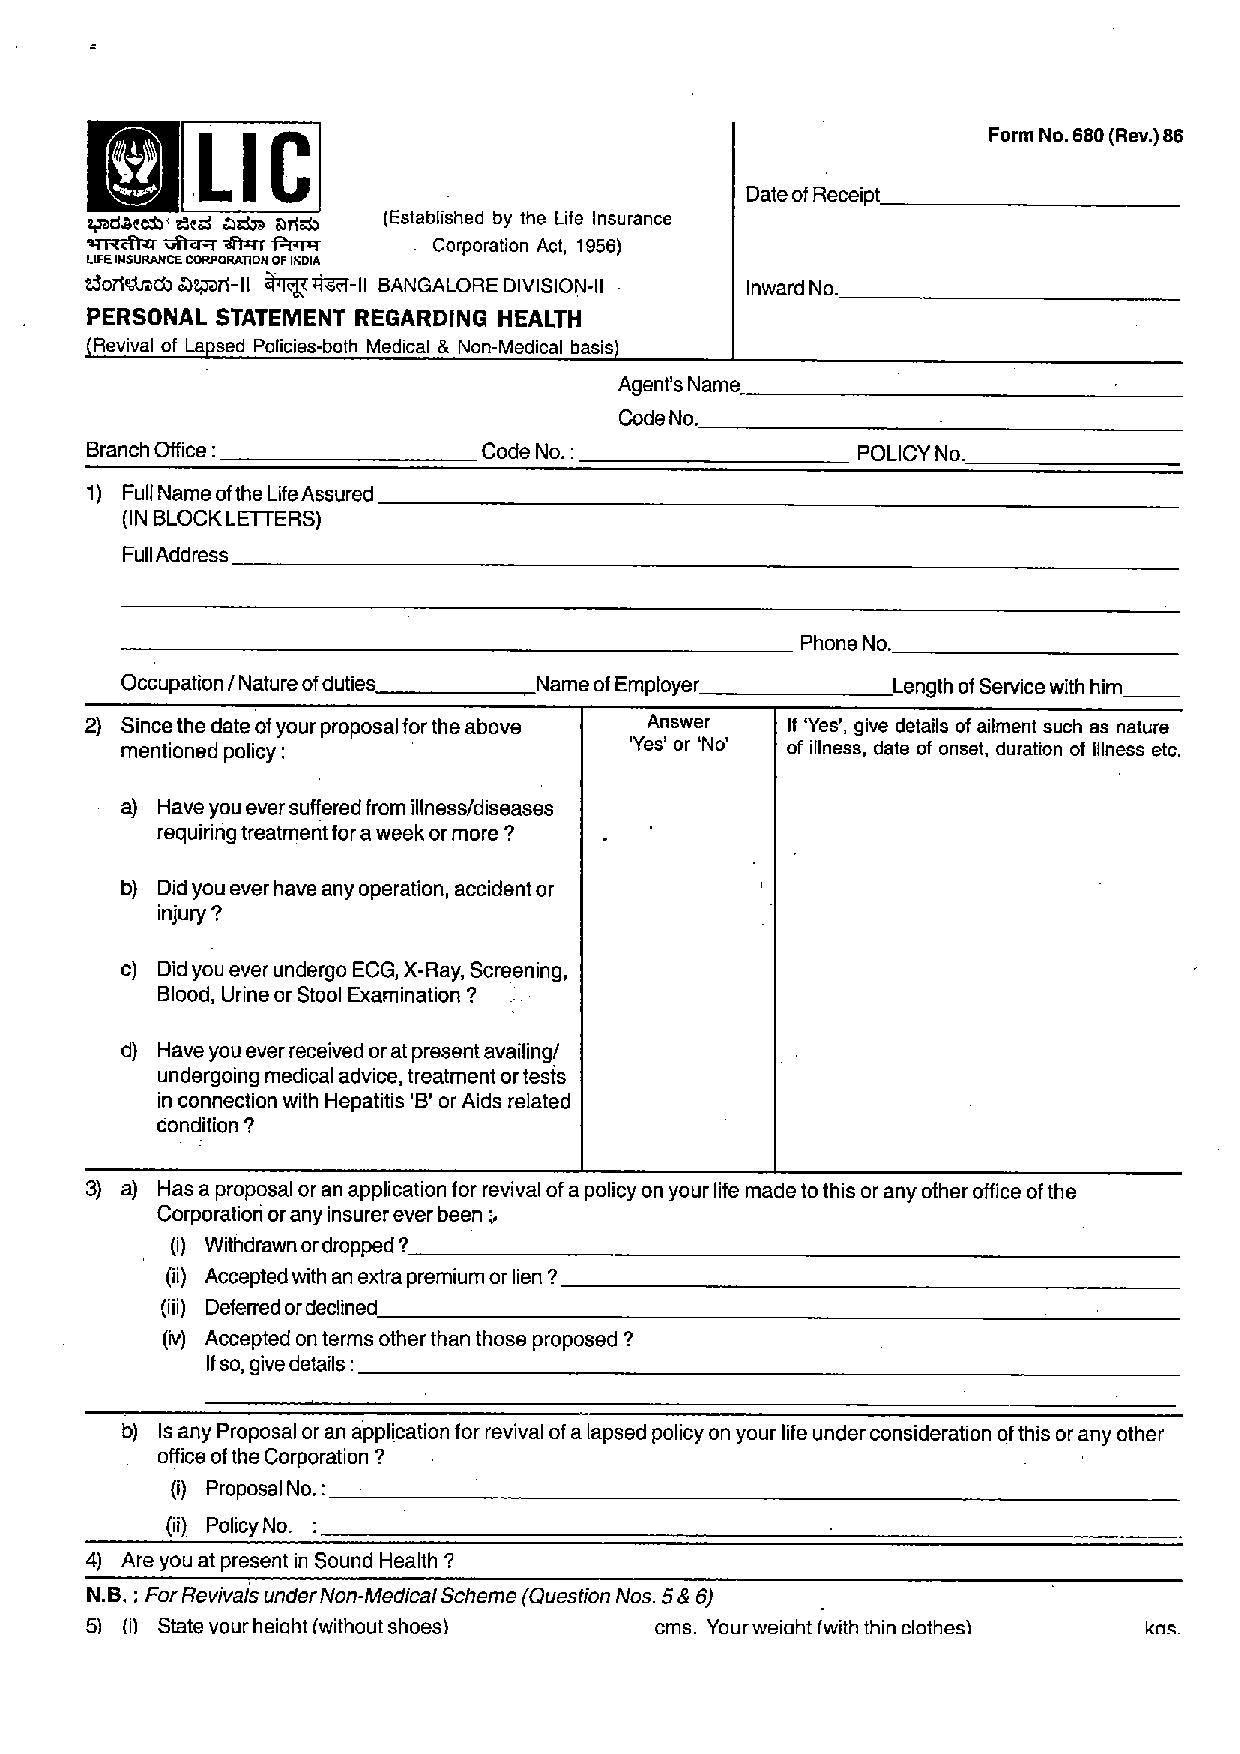 lic form for personal statement regarding health